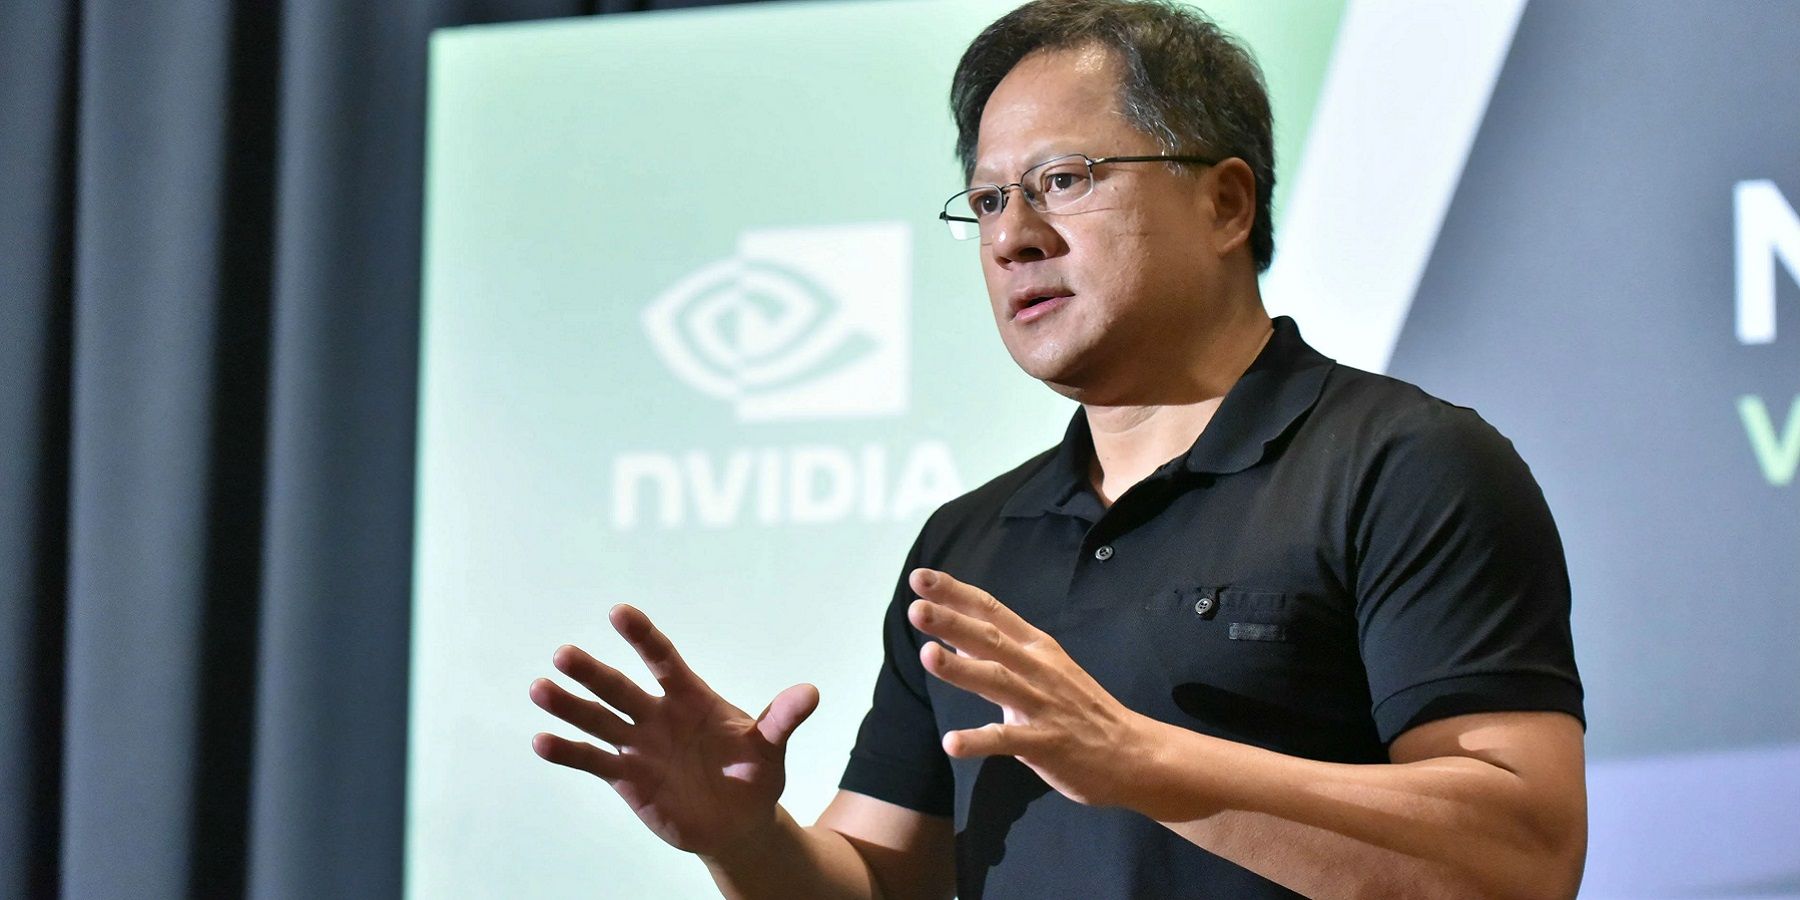 Photo showing Nvidia CEO, Jensen Huang, speaking at a conference.